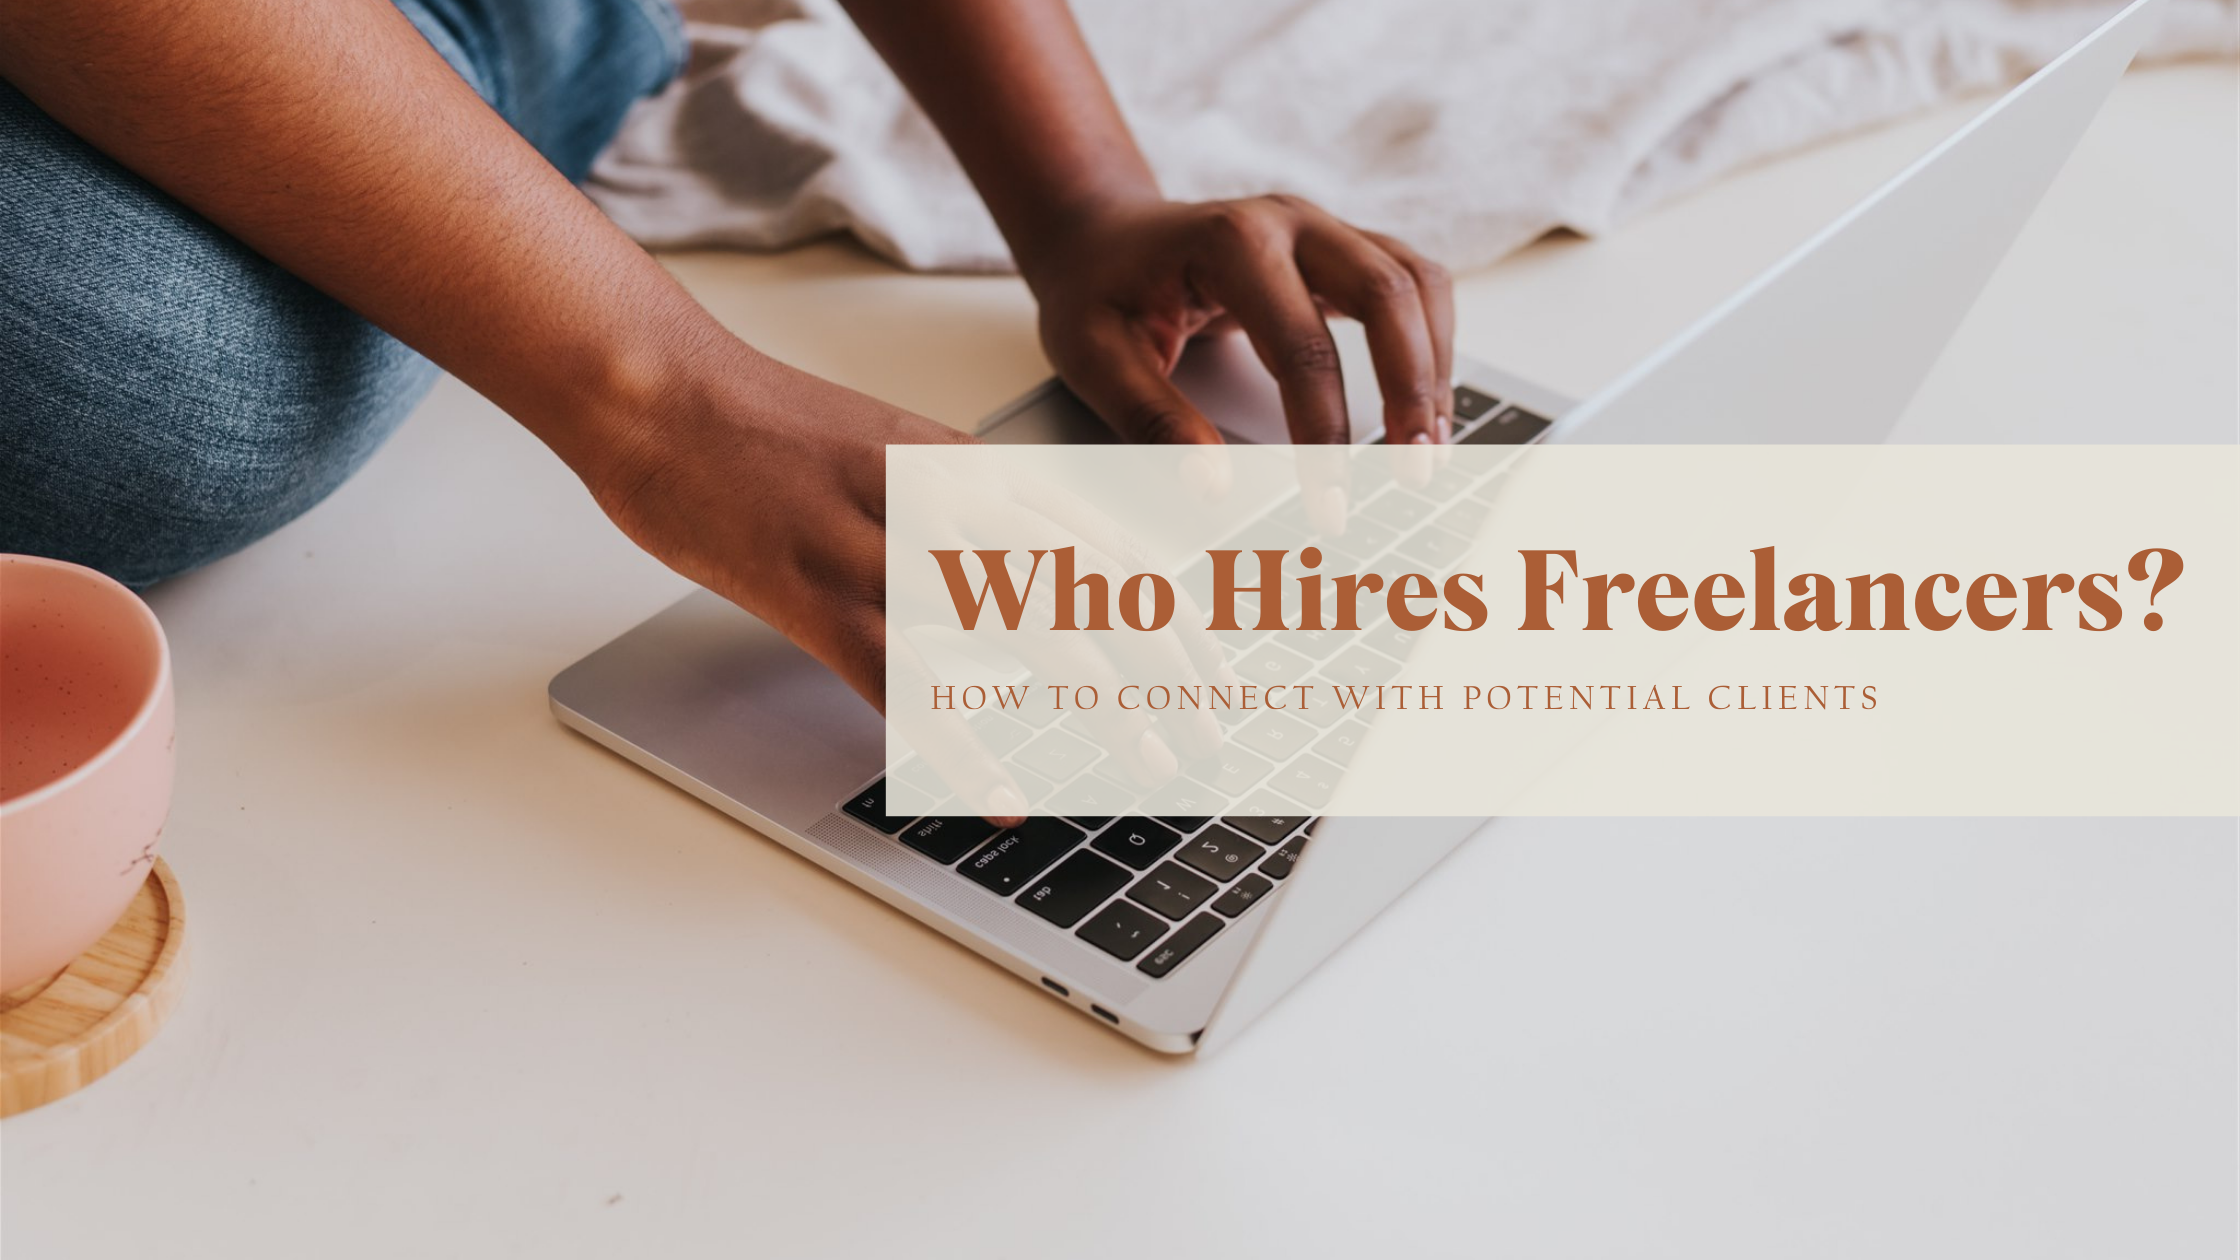 Who Hires Freelancers? How To Connect With Potential Clients